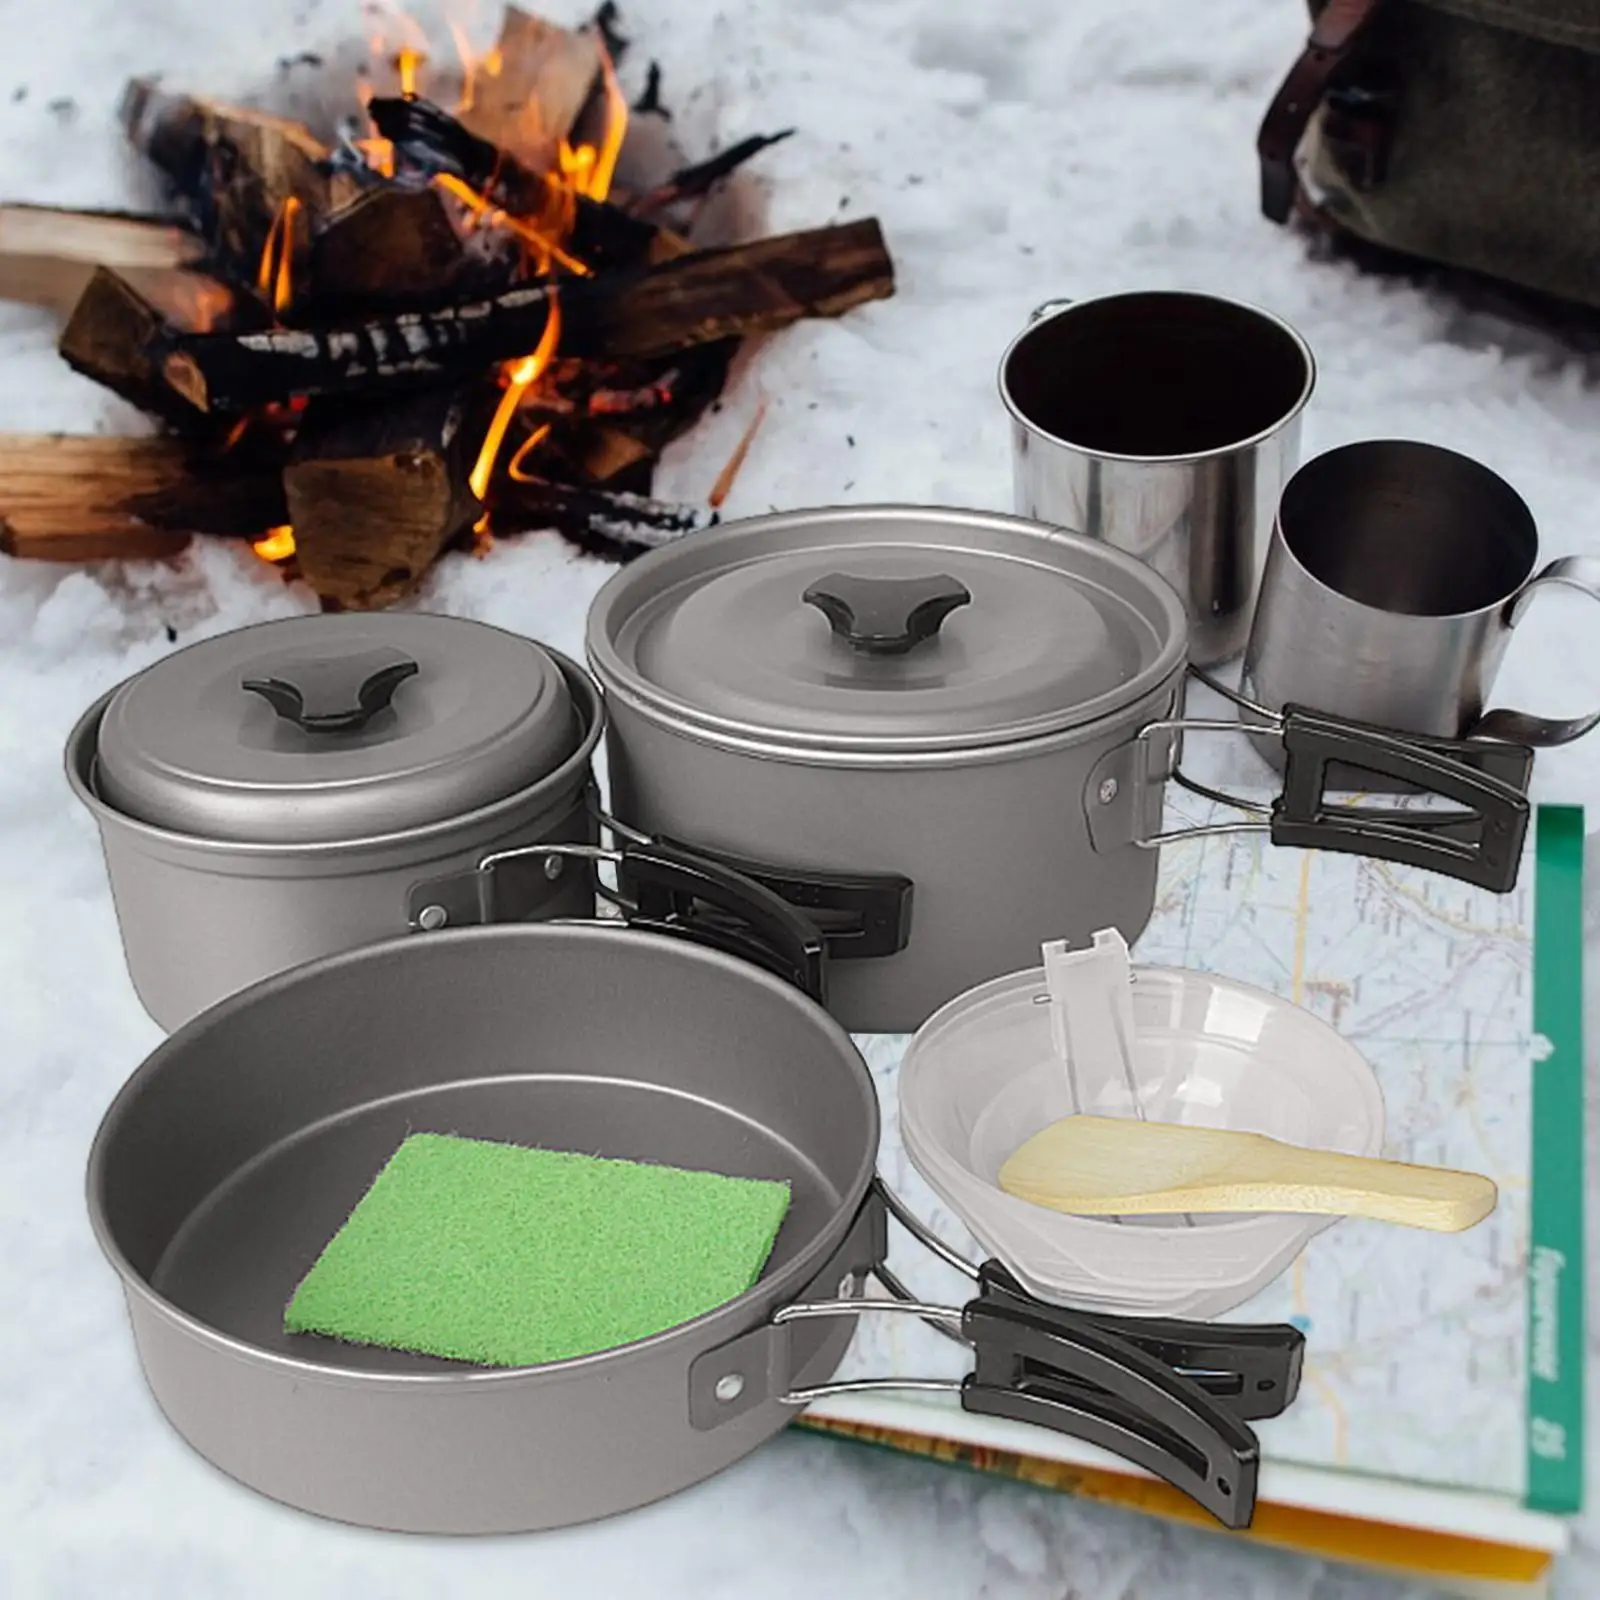 Camping Cookware Set for Campfire Included Mesh Carry Bag Compact Camping